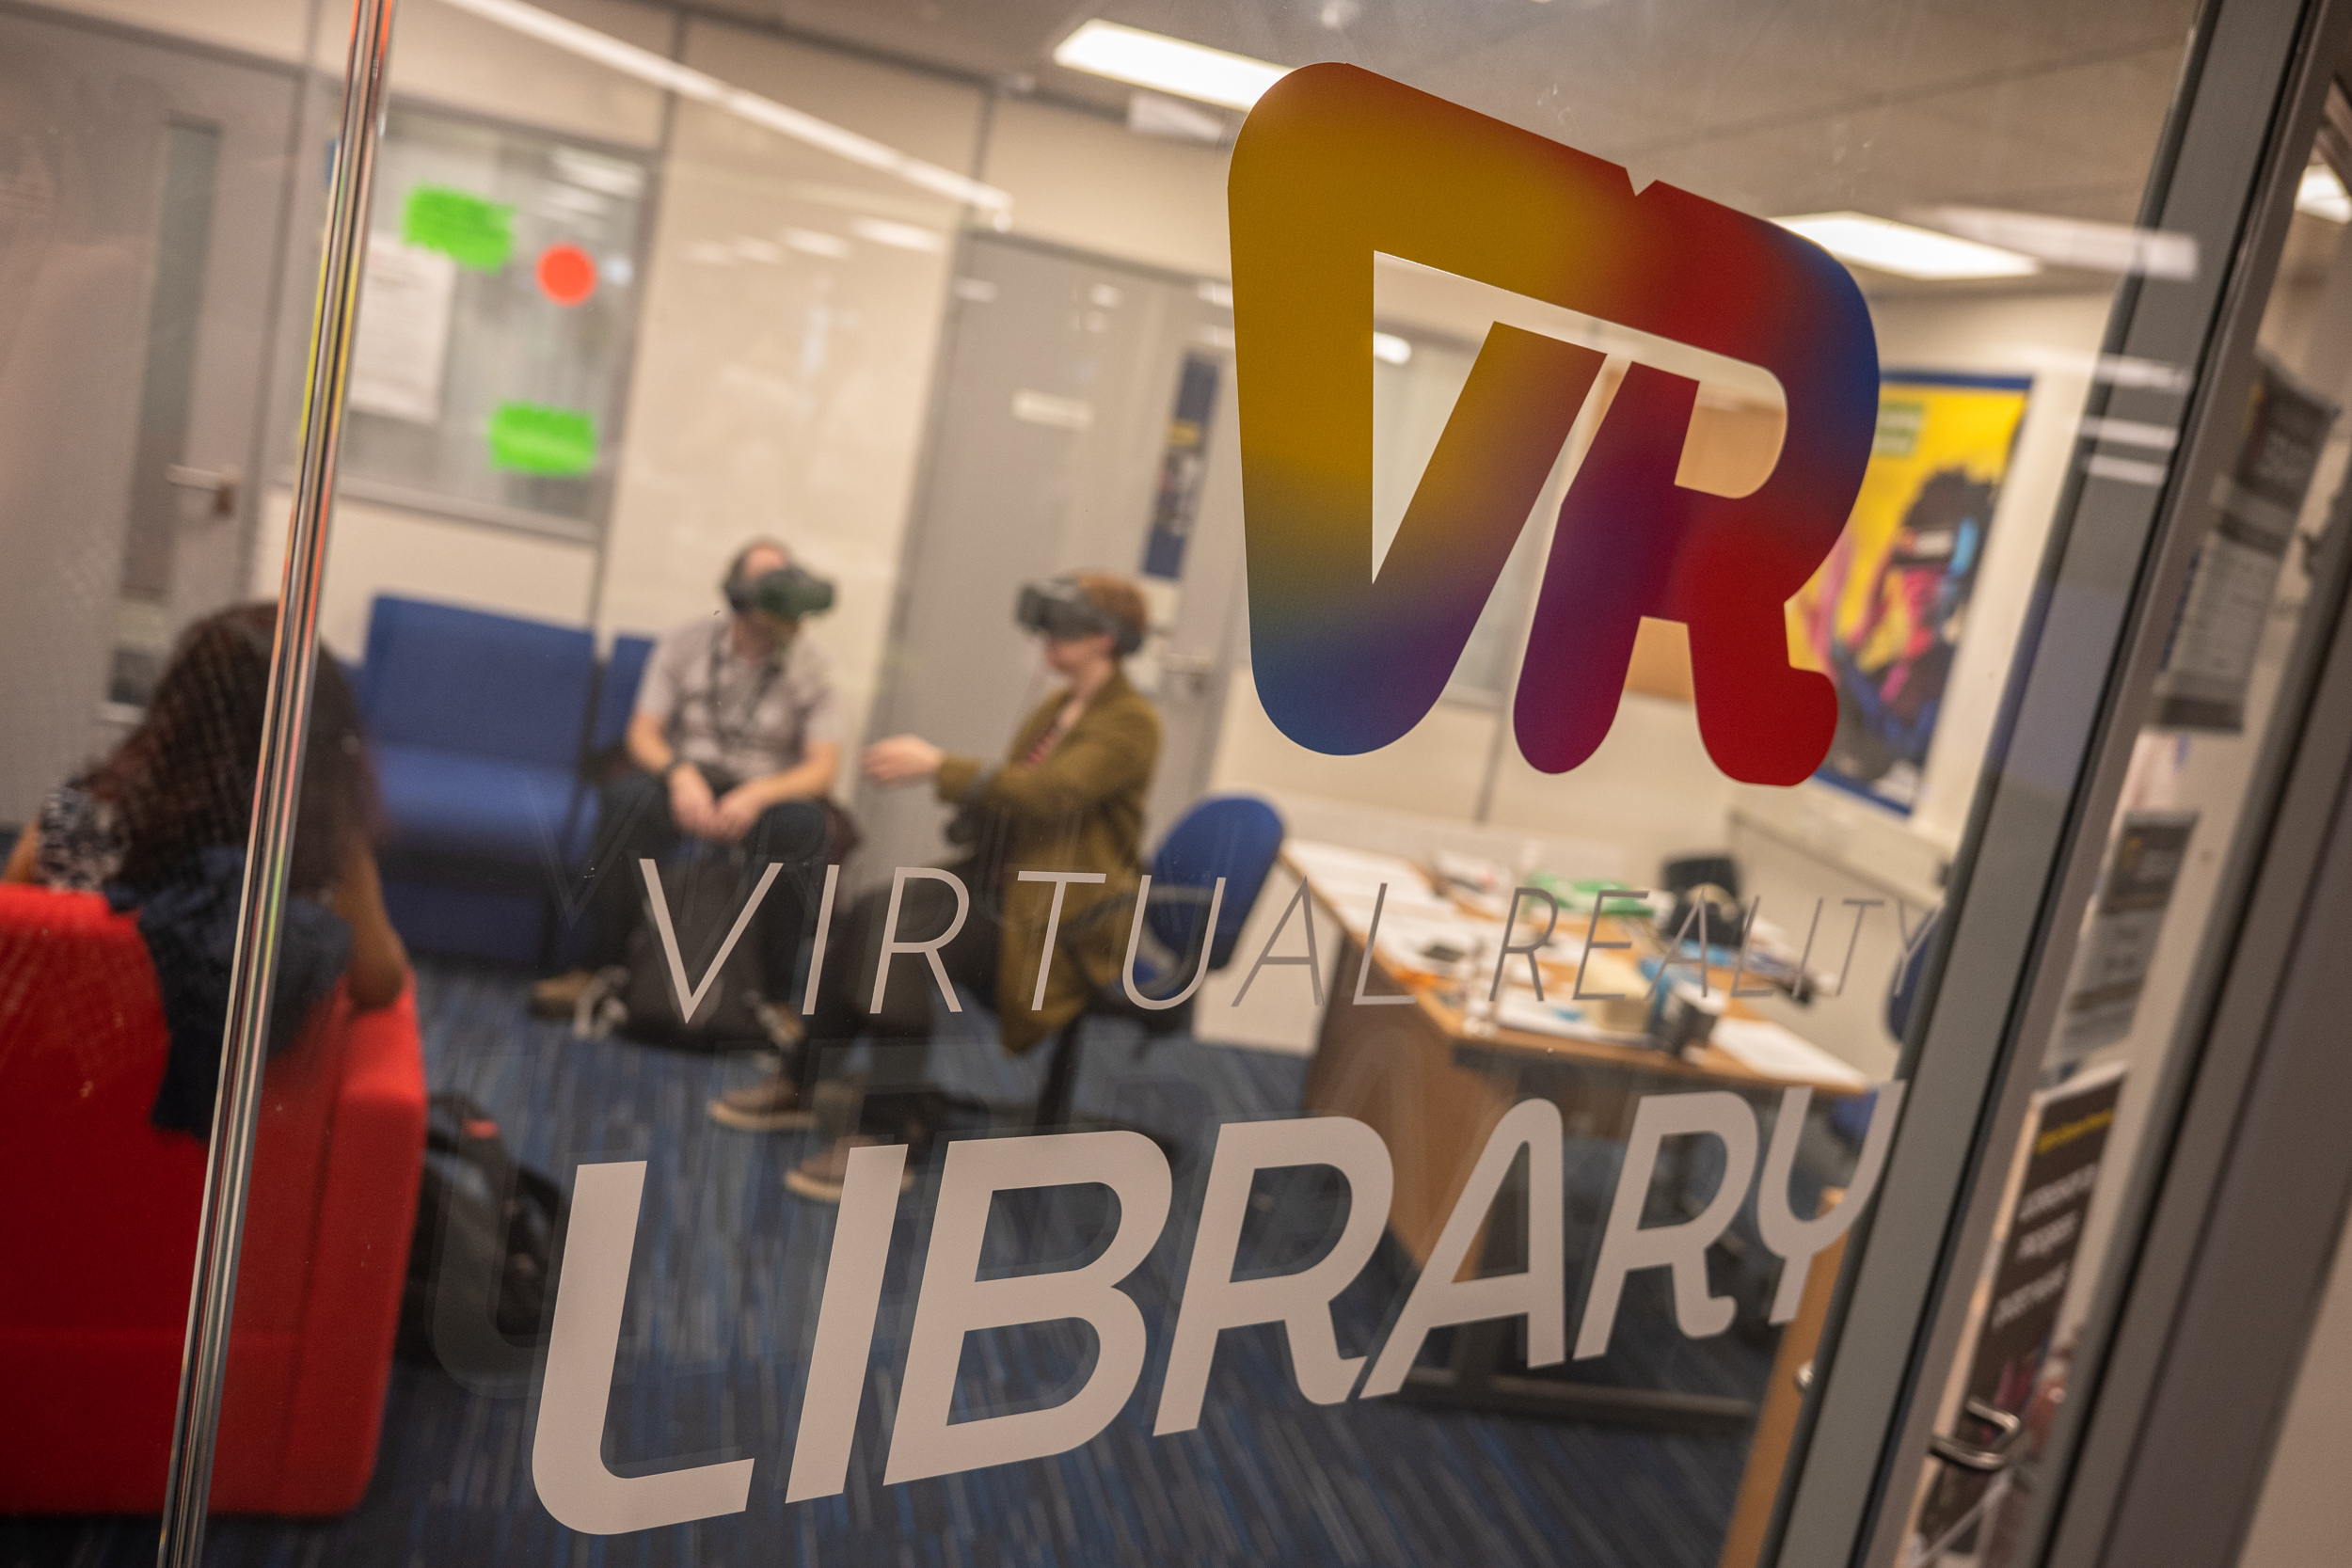 Image showing class screen with sign saying 'VR virtual library' with two people seated behind